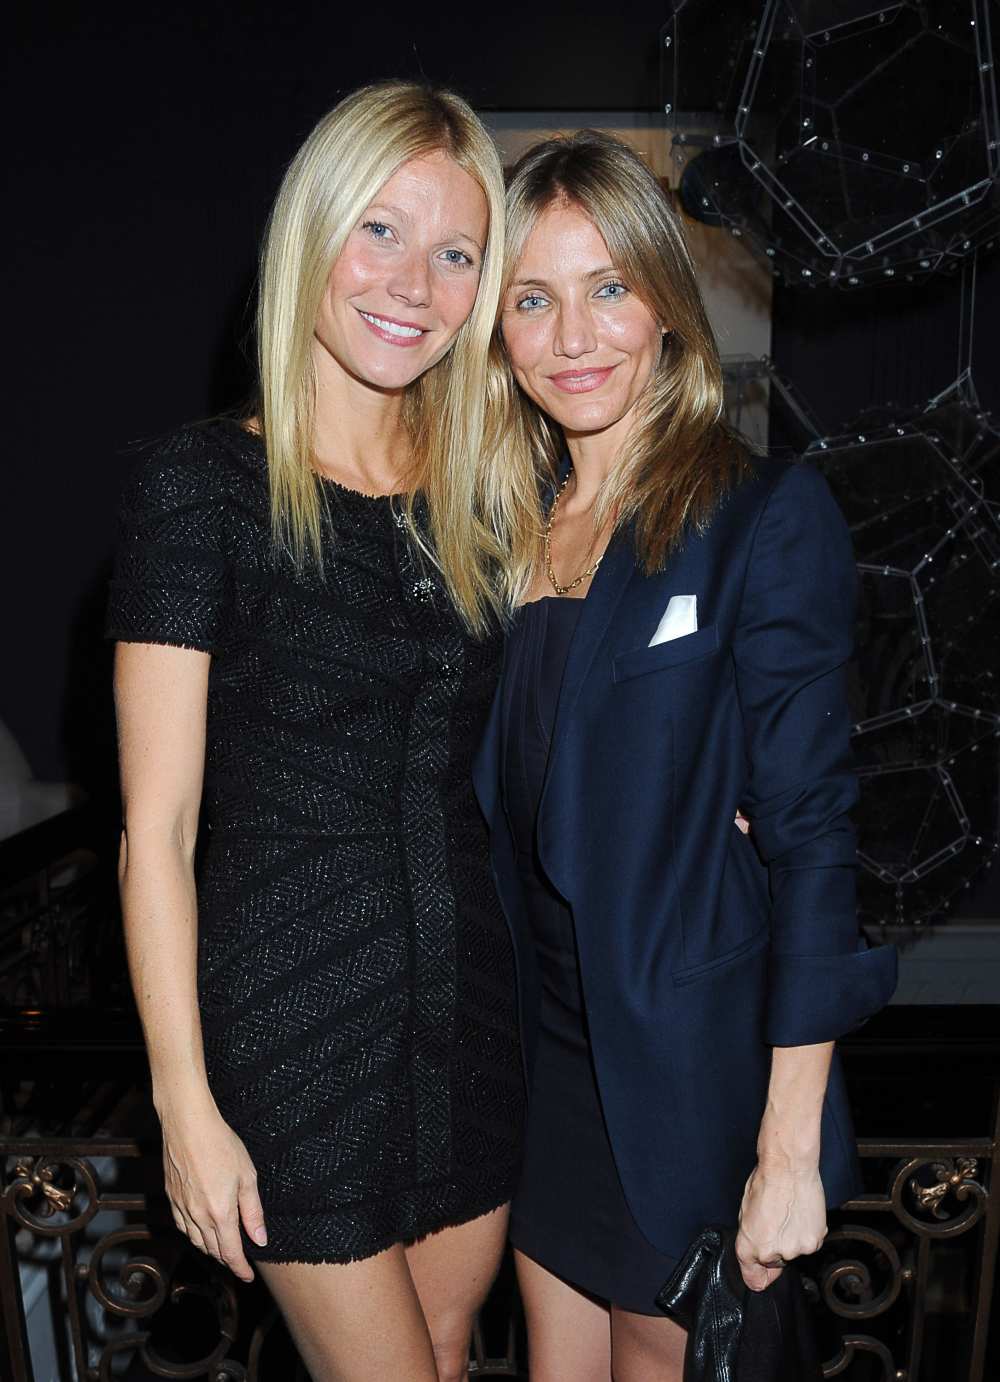 Gwyneth Paltrow ‘Very Excited’ for Cameron Diaz After She Announces She’s a New Mom